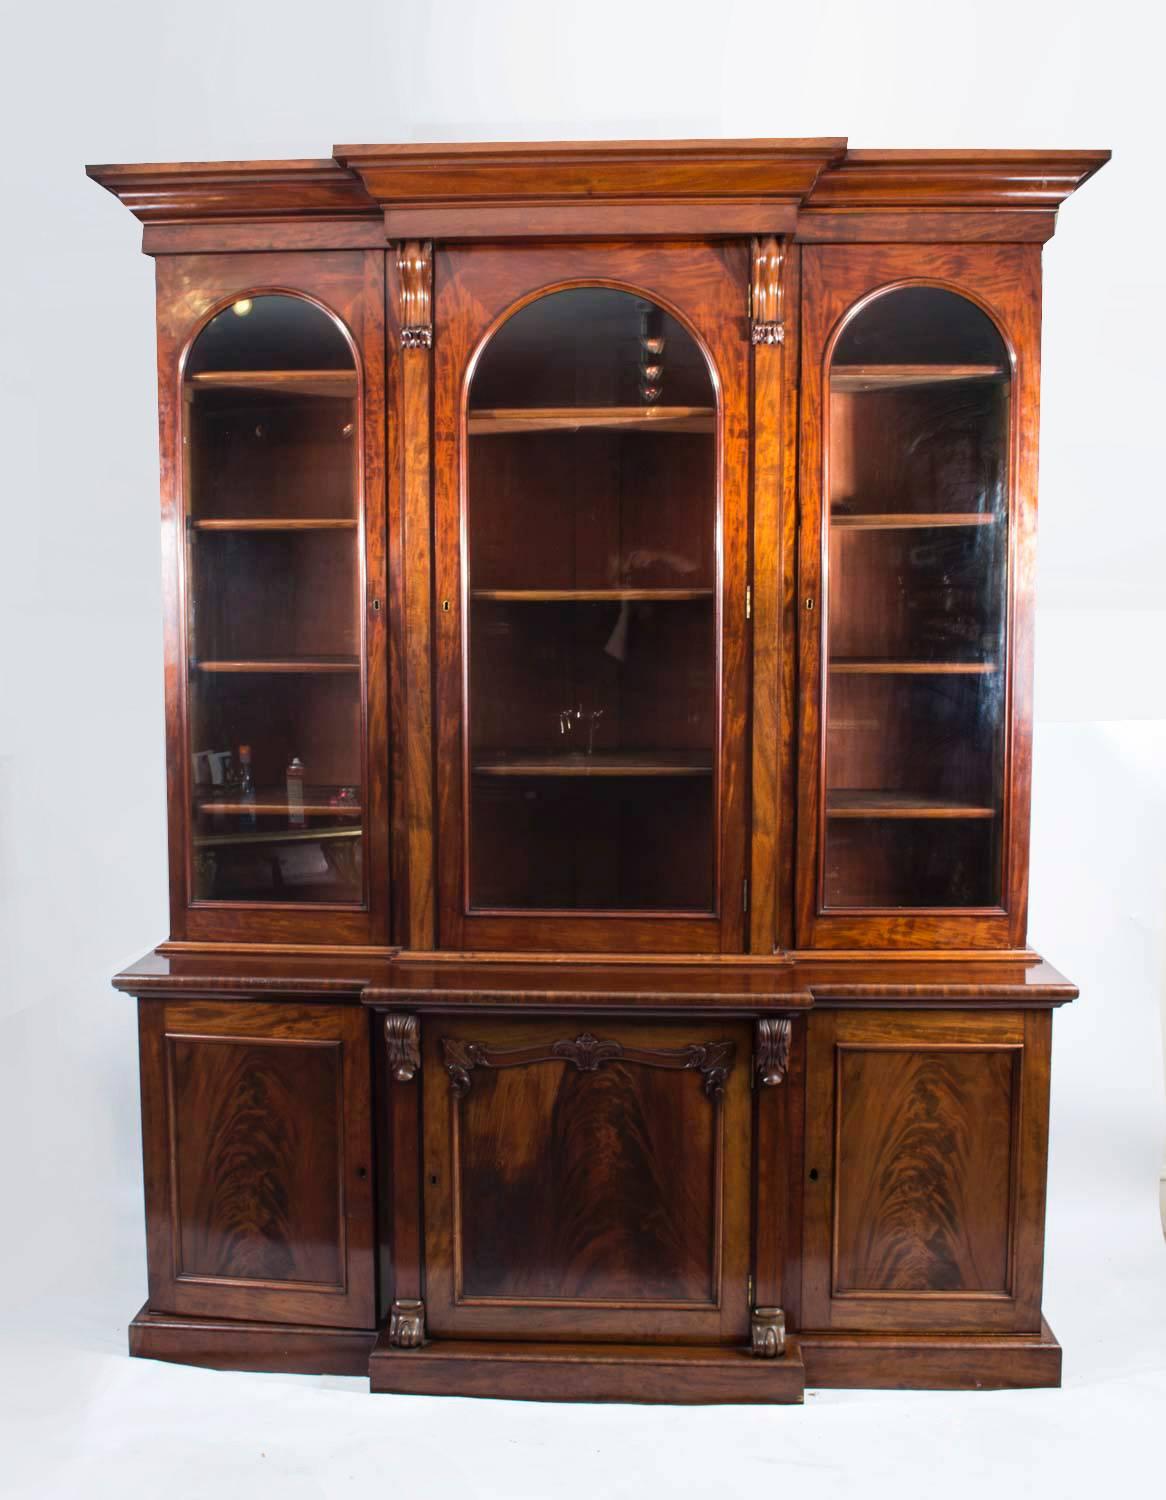 This is a beautiful antique Victorian flame mahogany breakfront bookcase, masterfully crafted in rich mahogany, circa 1860 in date. 

This grand bookcase features an upper section with three arched glazed panel doors, spaced by corbel like